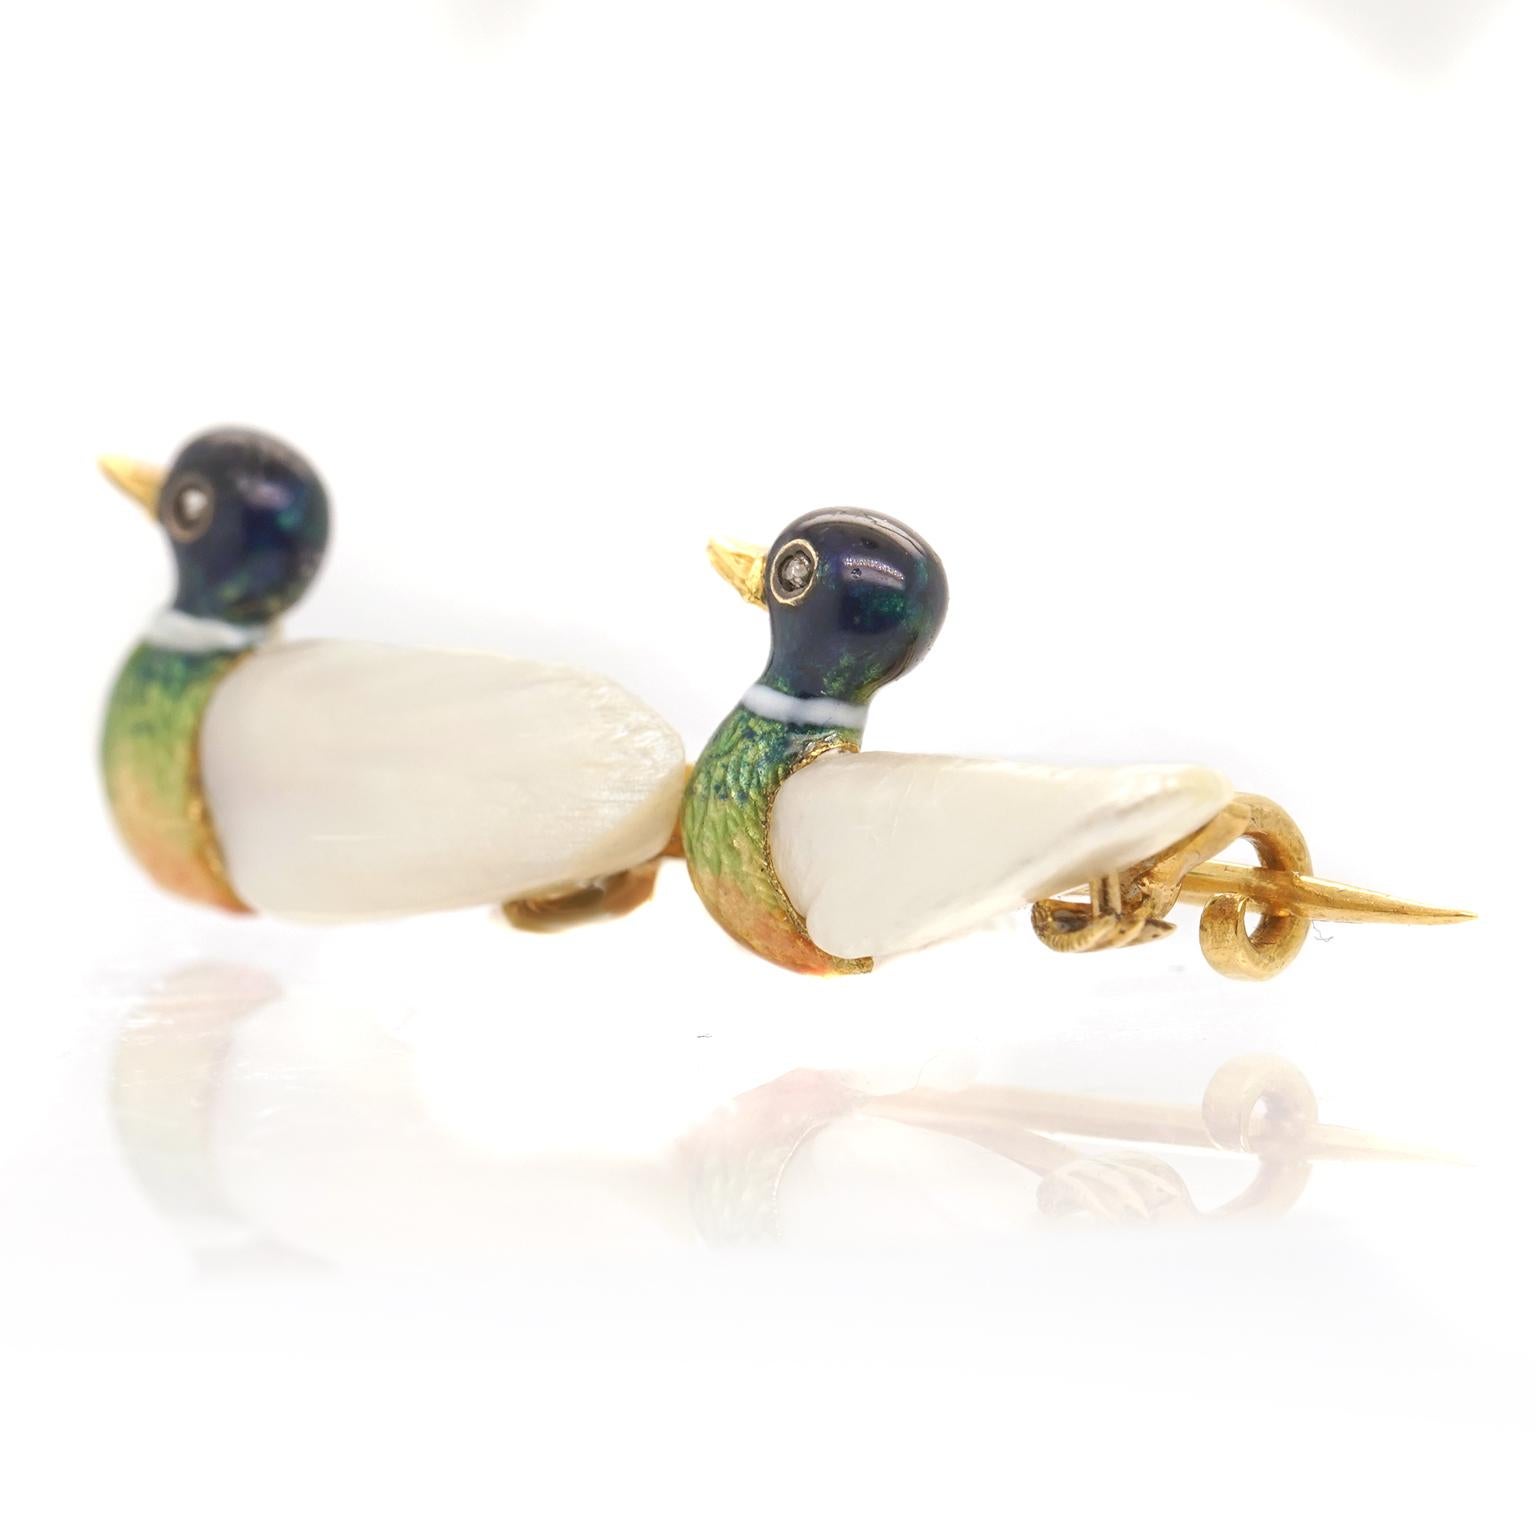 Cabochon Antique Brooch with Pair of Ducks